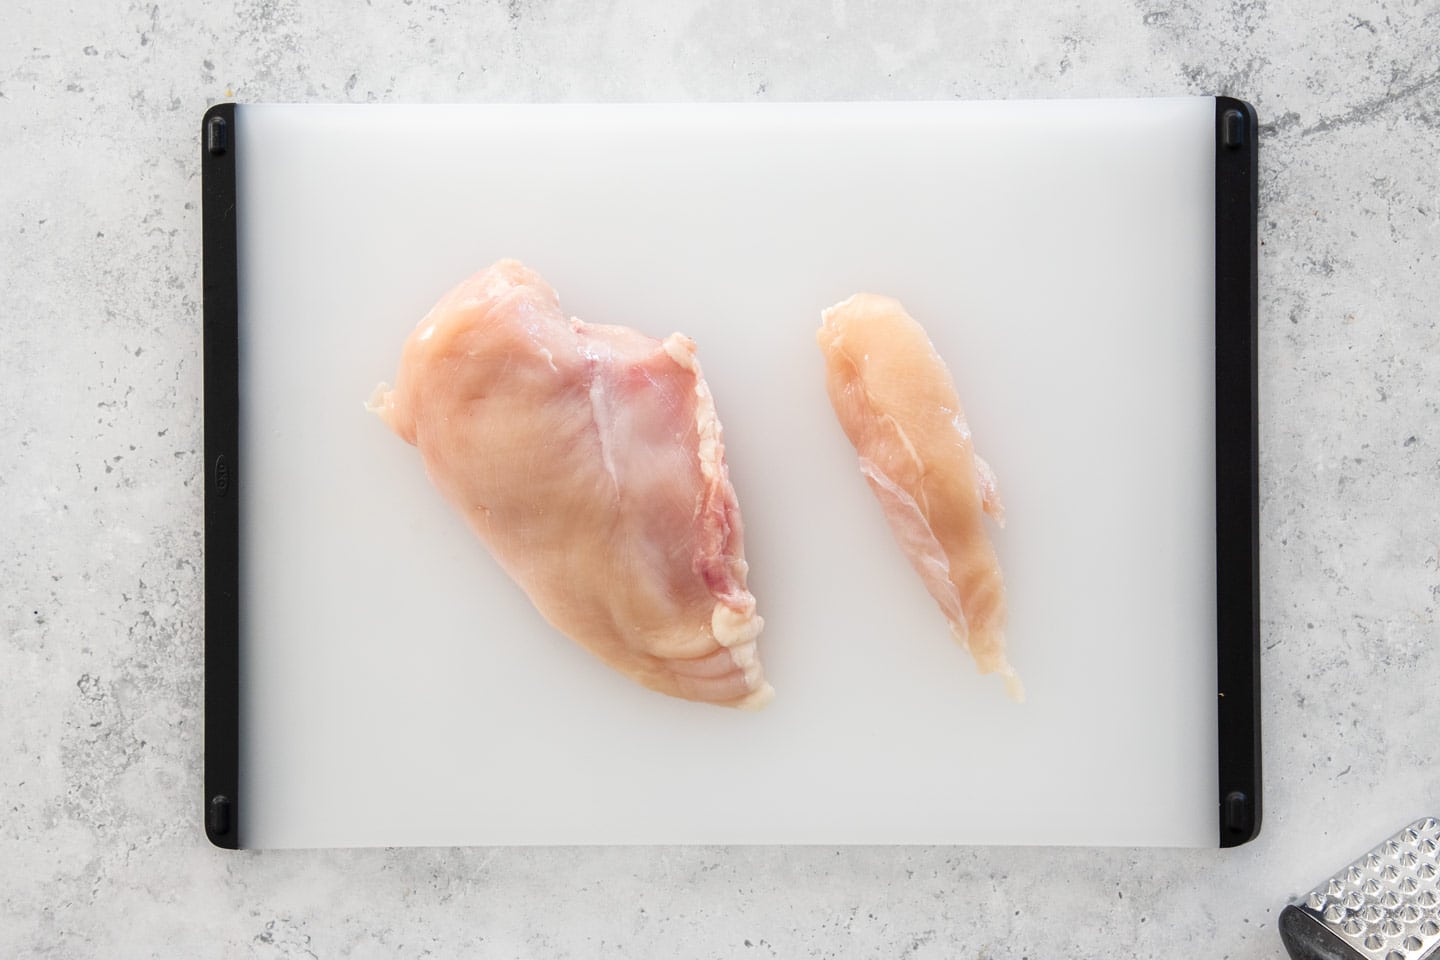 A chicken breast and chicken tender on a chopping board.